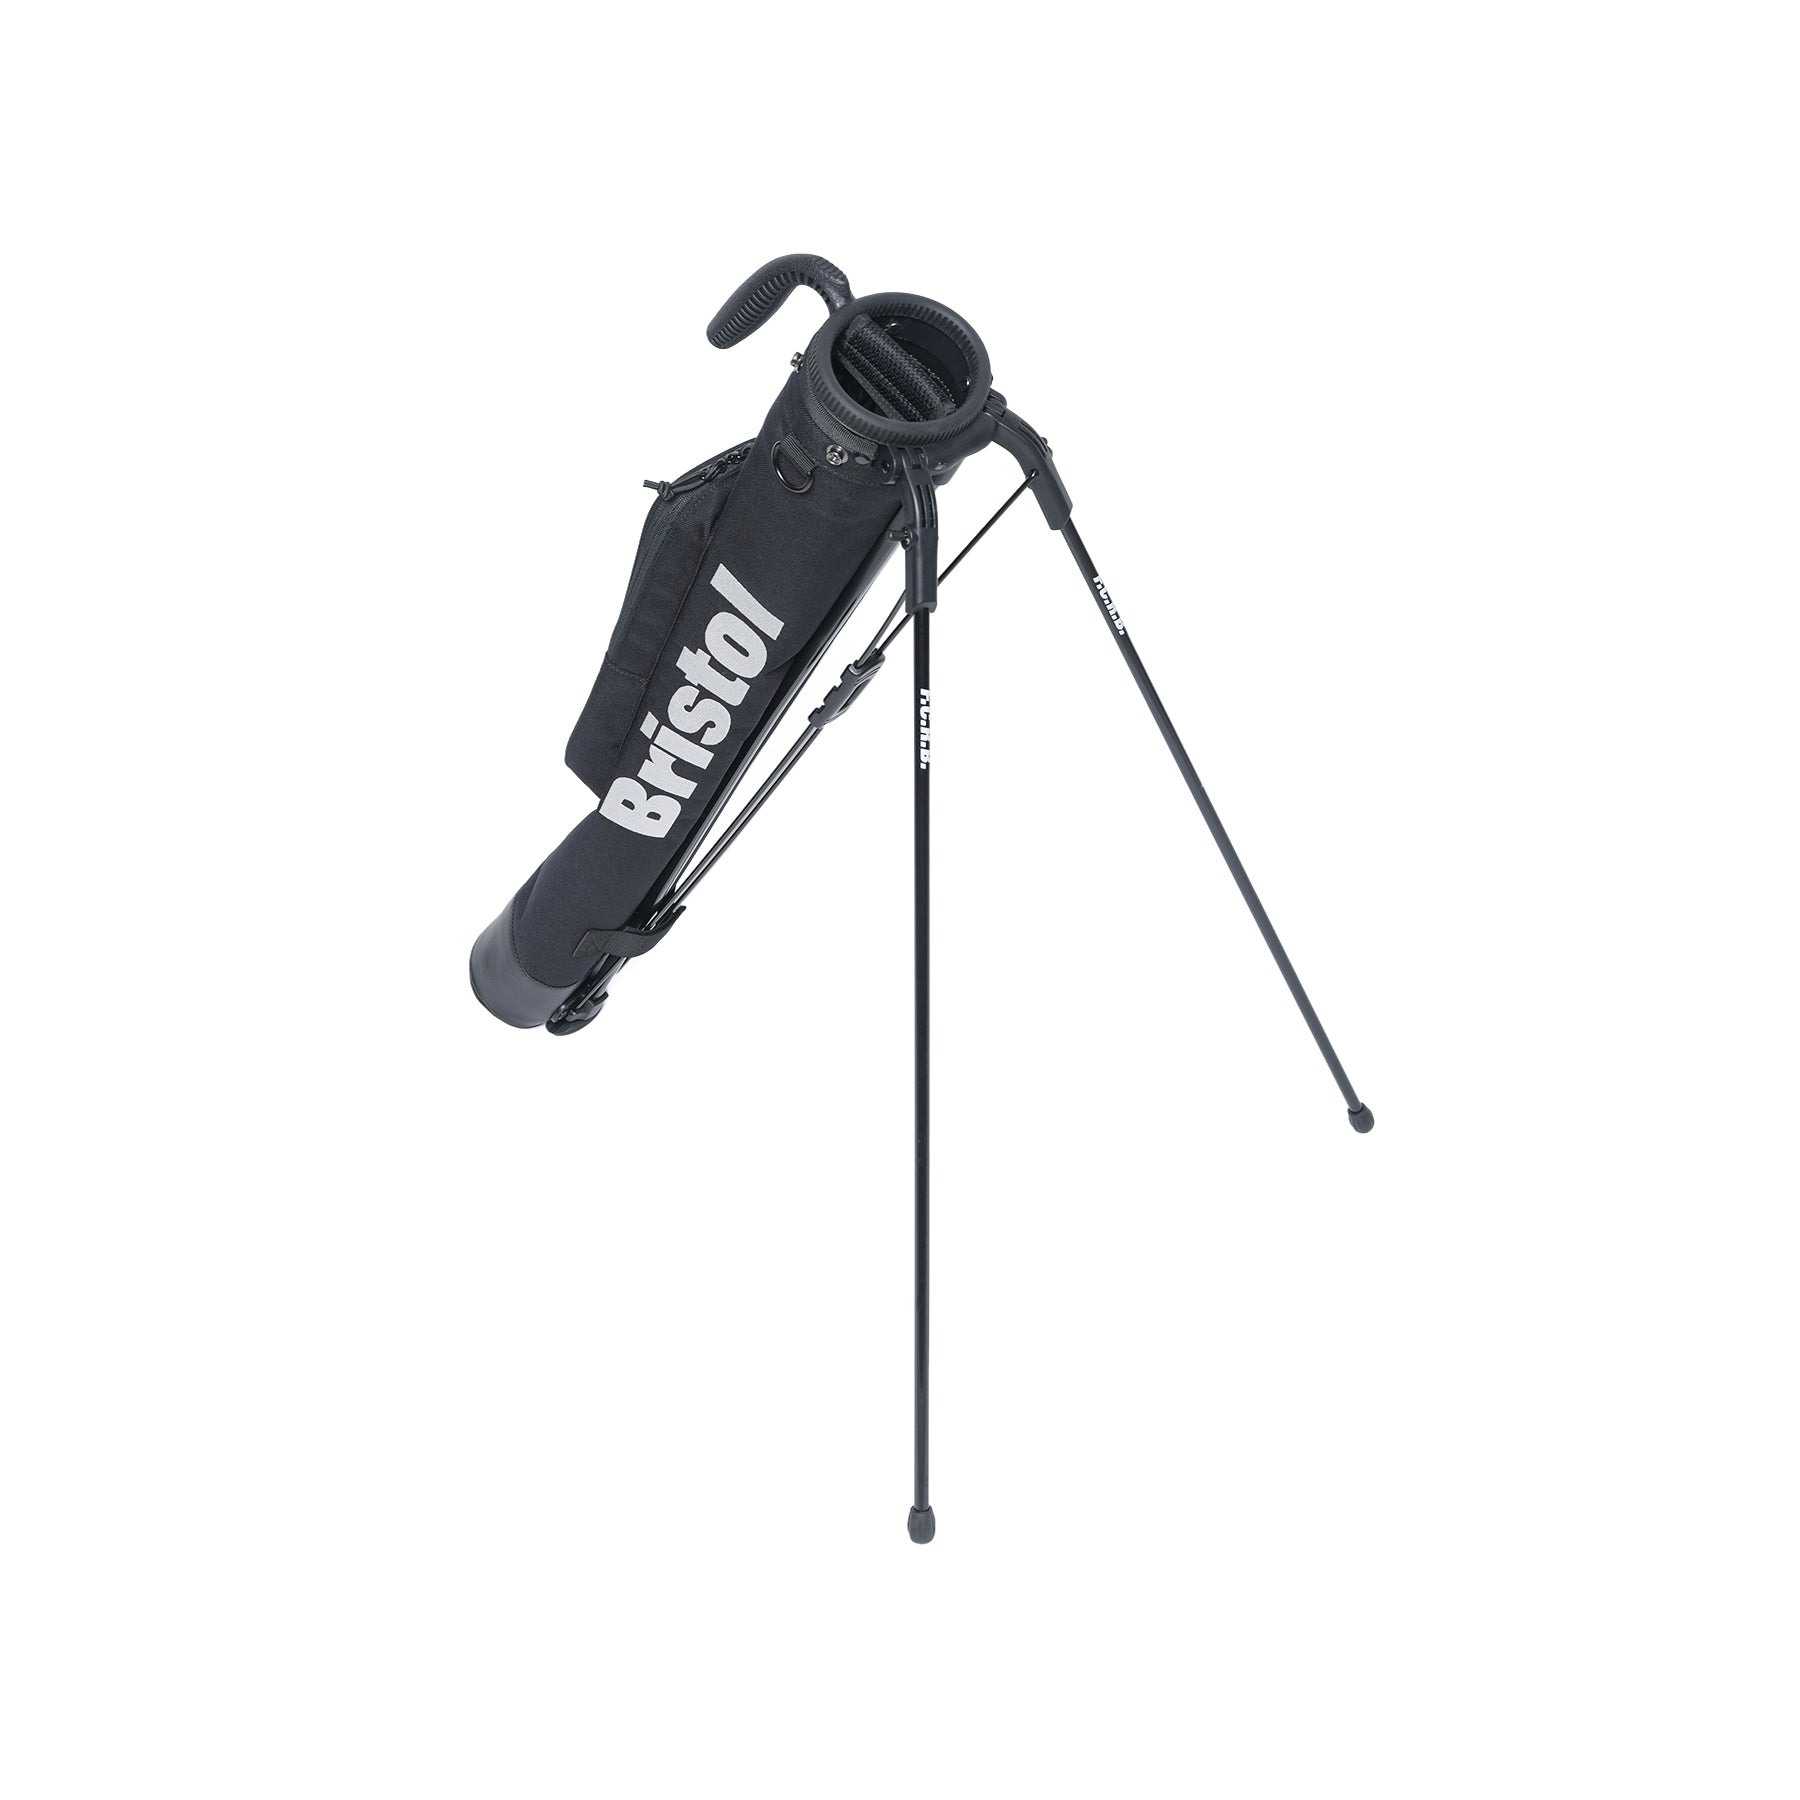 F.C.Real Bristol]SELF STAND GOLF BAG(FCRB-230127) – R&Co.